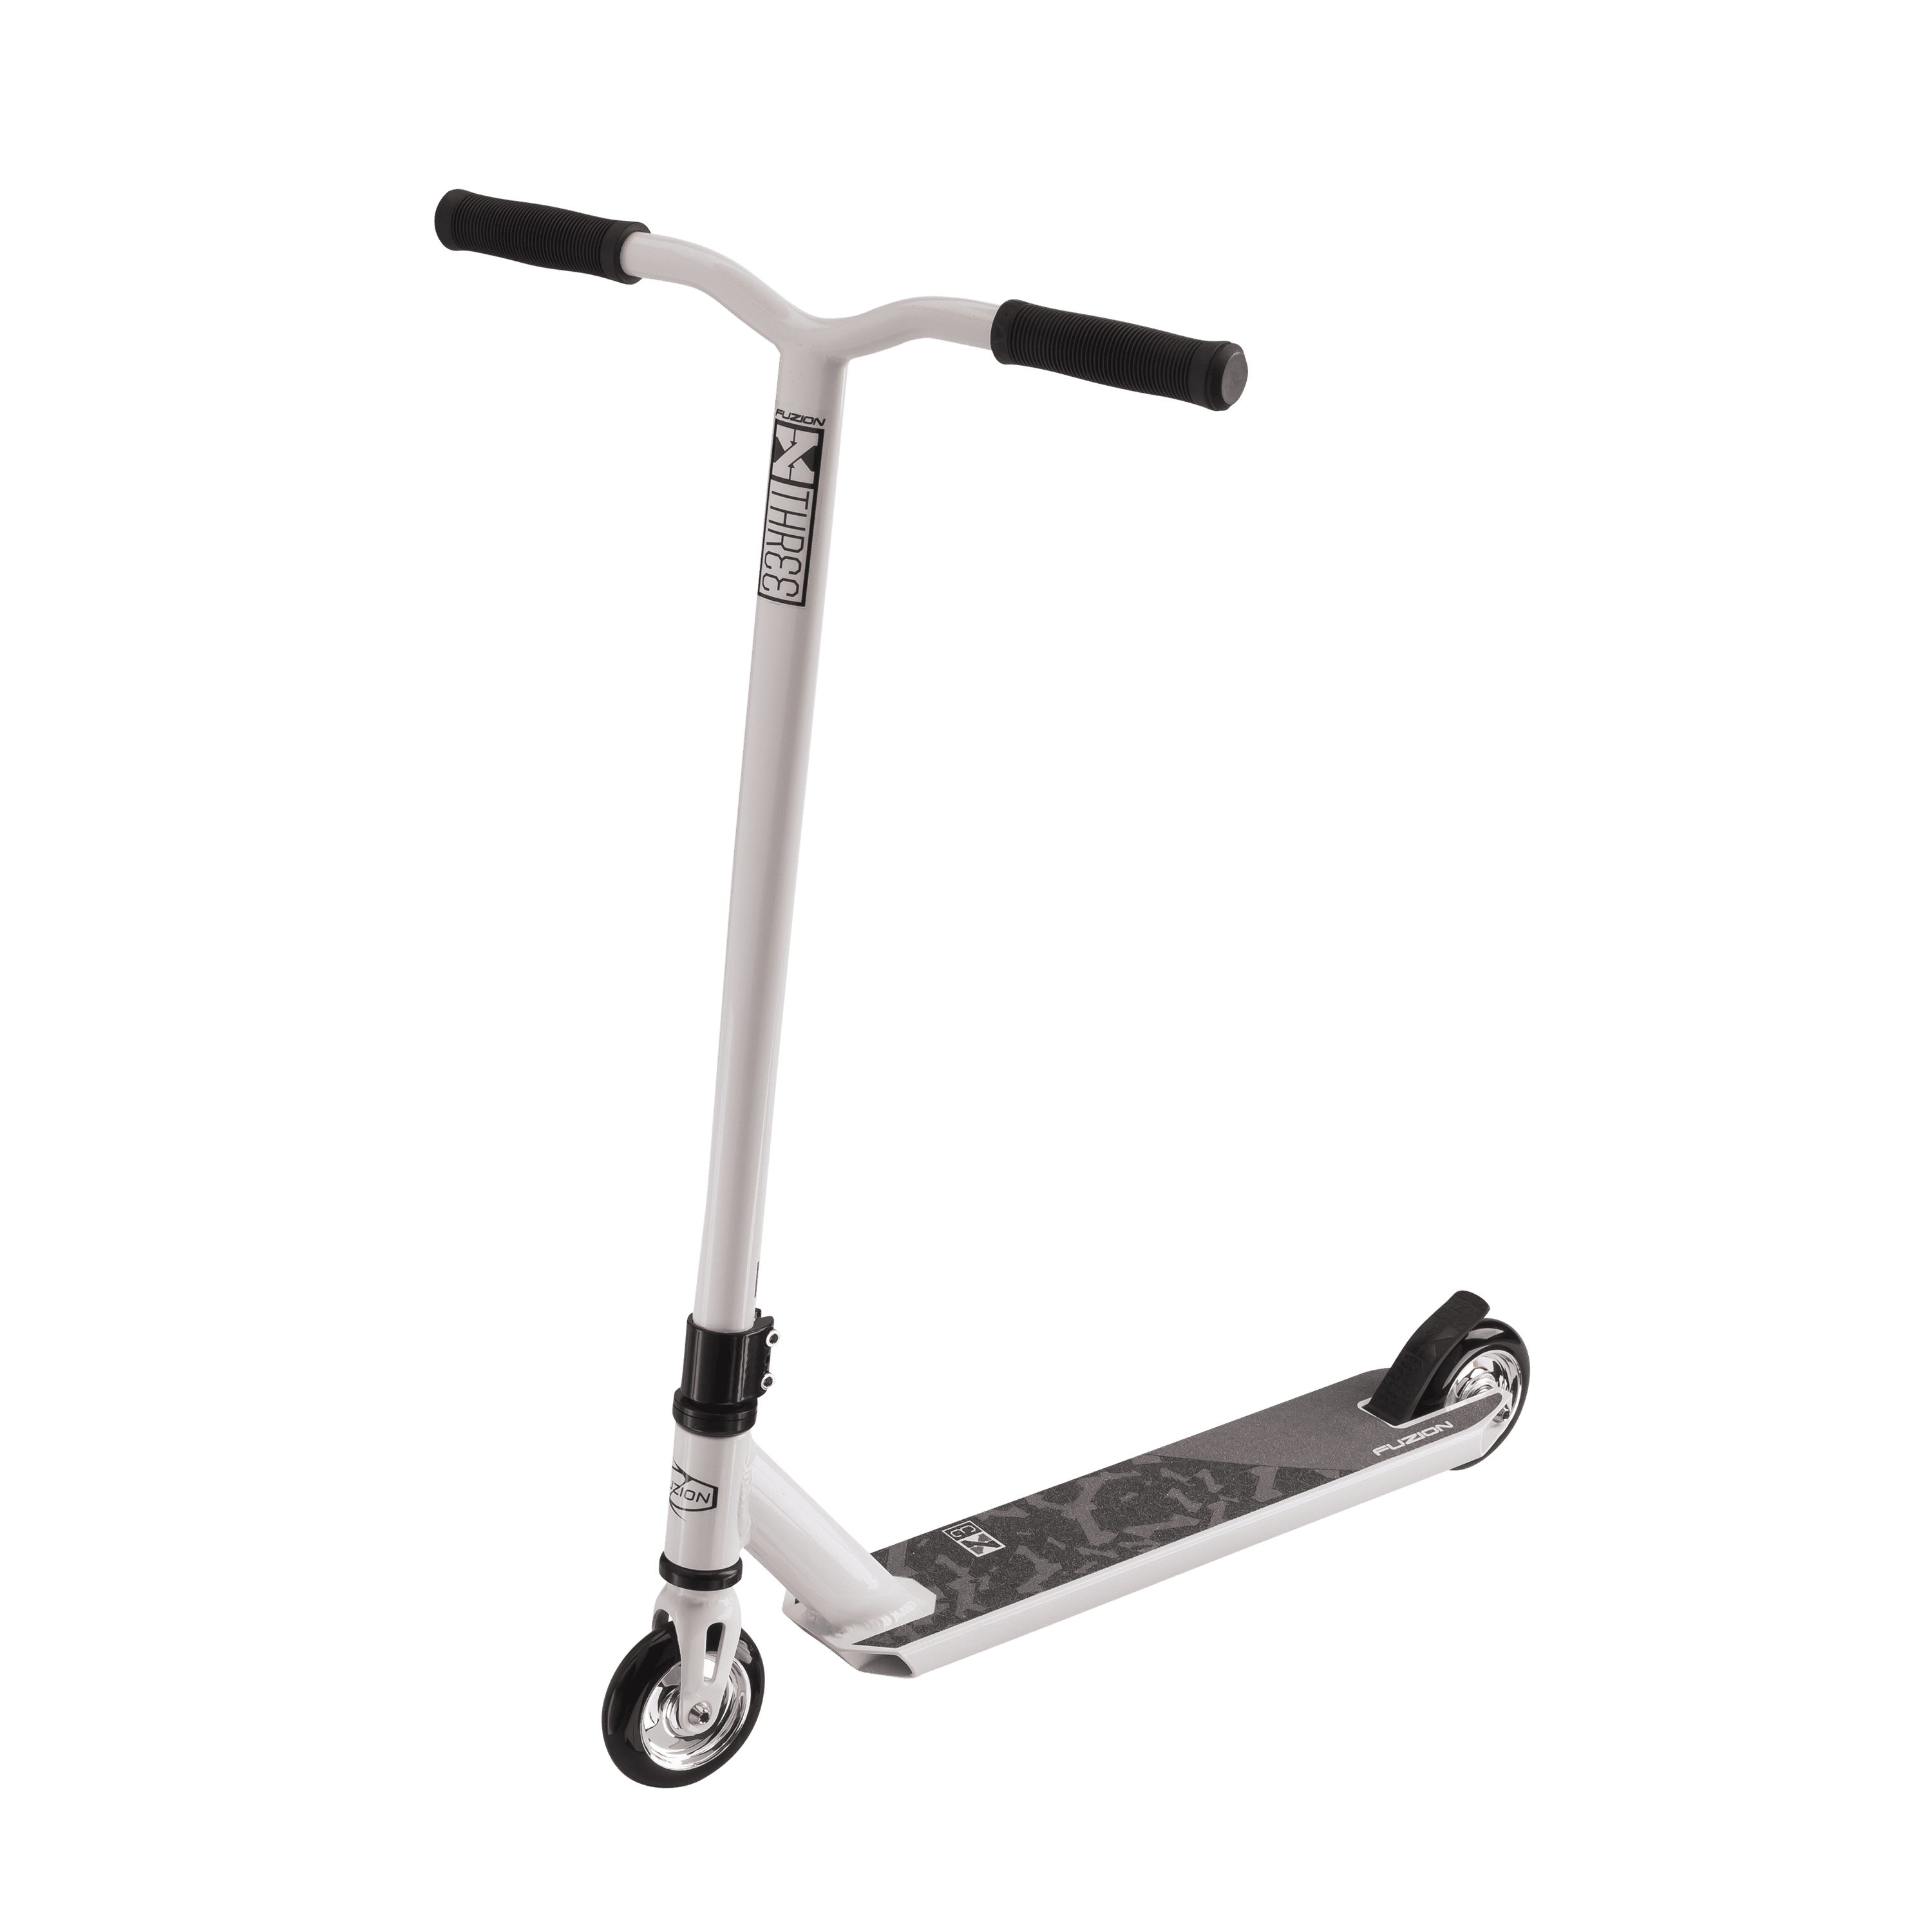 Arcade Pro Scooters Stunt Scooter for Kids 8 Years and Up Perfect for Begins 